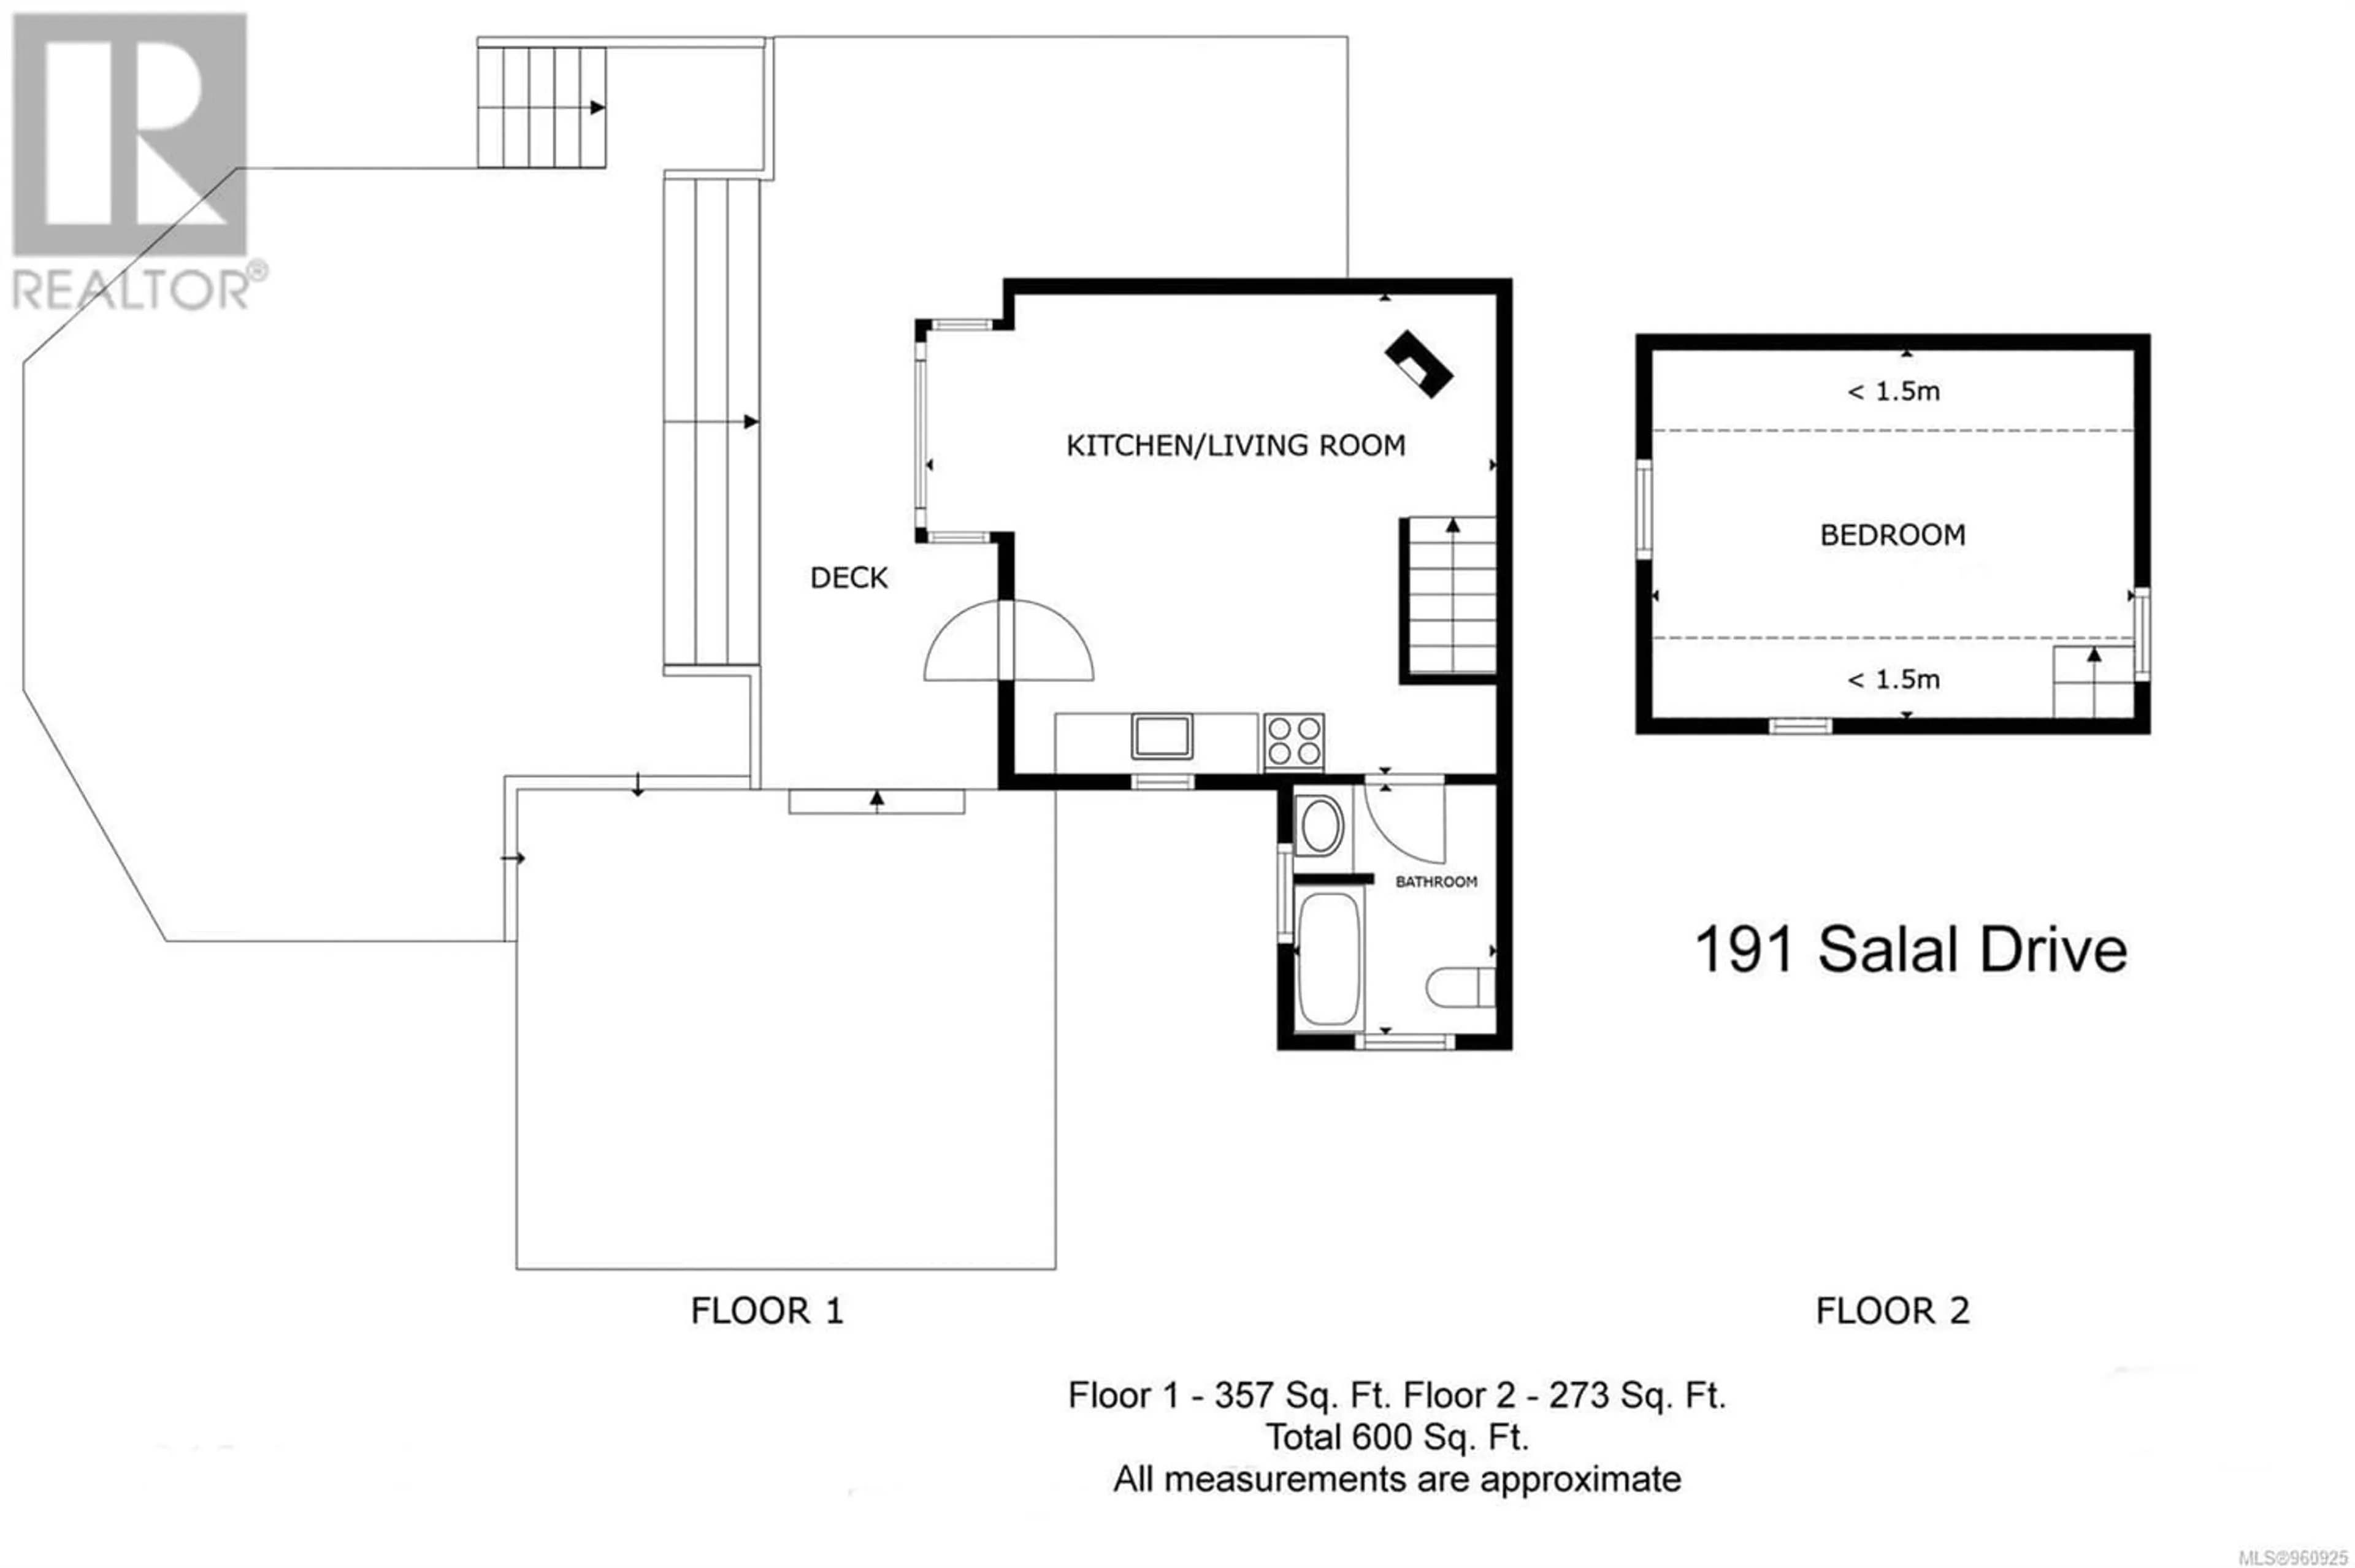 Floor plan for 919 Salal Dr, Mudge Island British Columbia A1A1A1